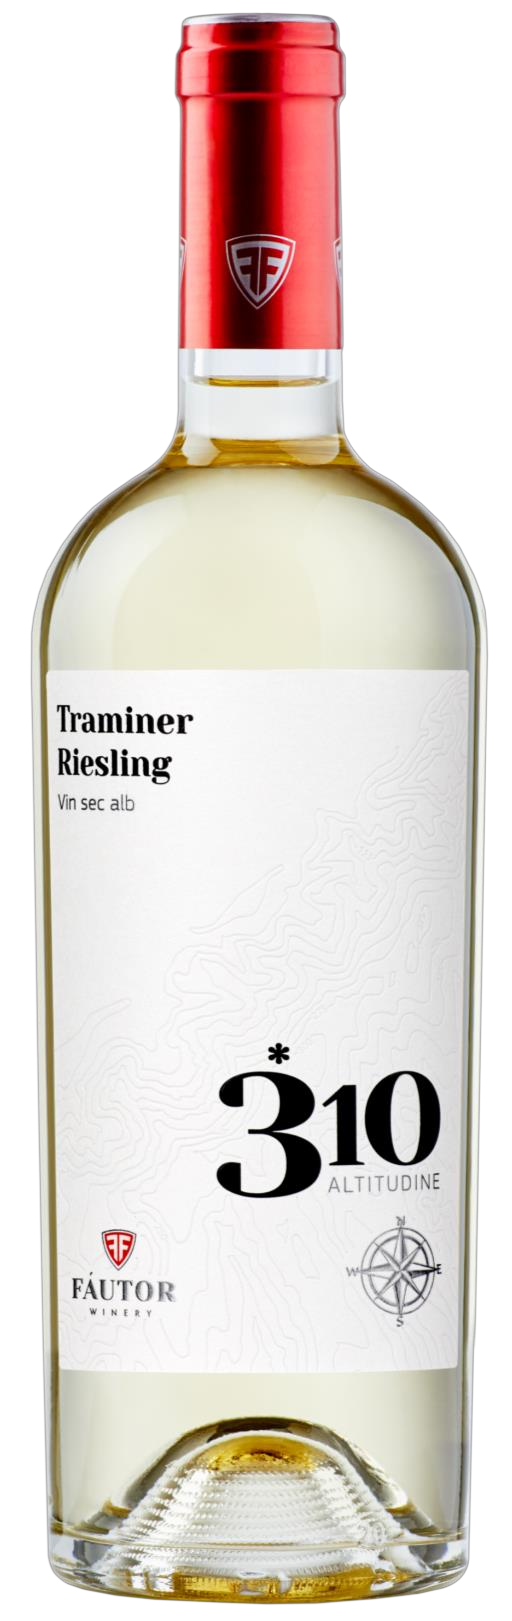 Fautor 310 ALTITUDINE Traminer-Riesling, White dry wine 0.75l photo trumbs 1